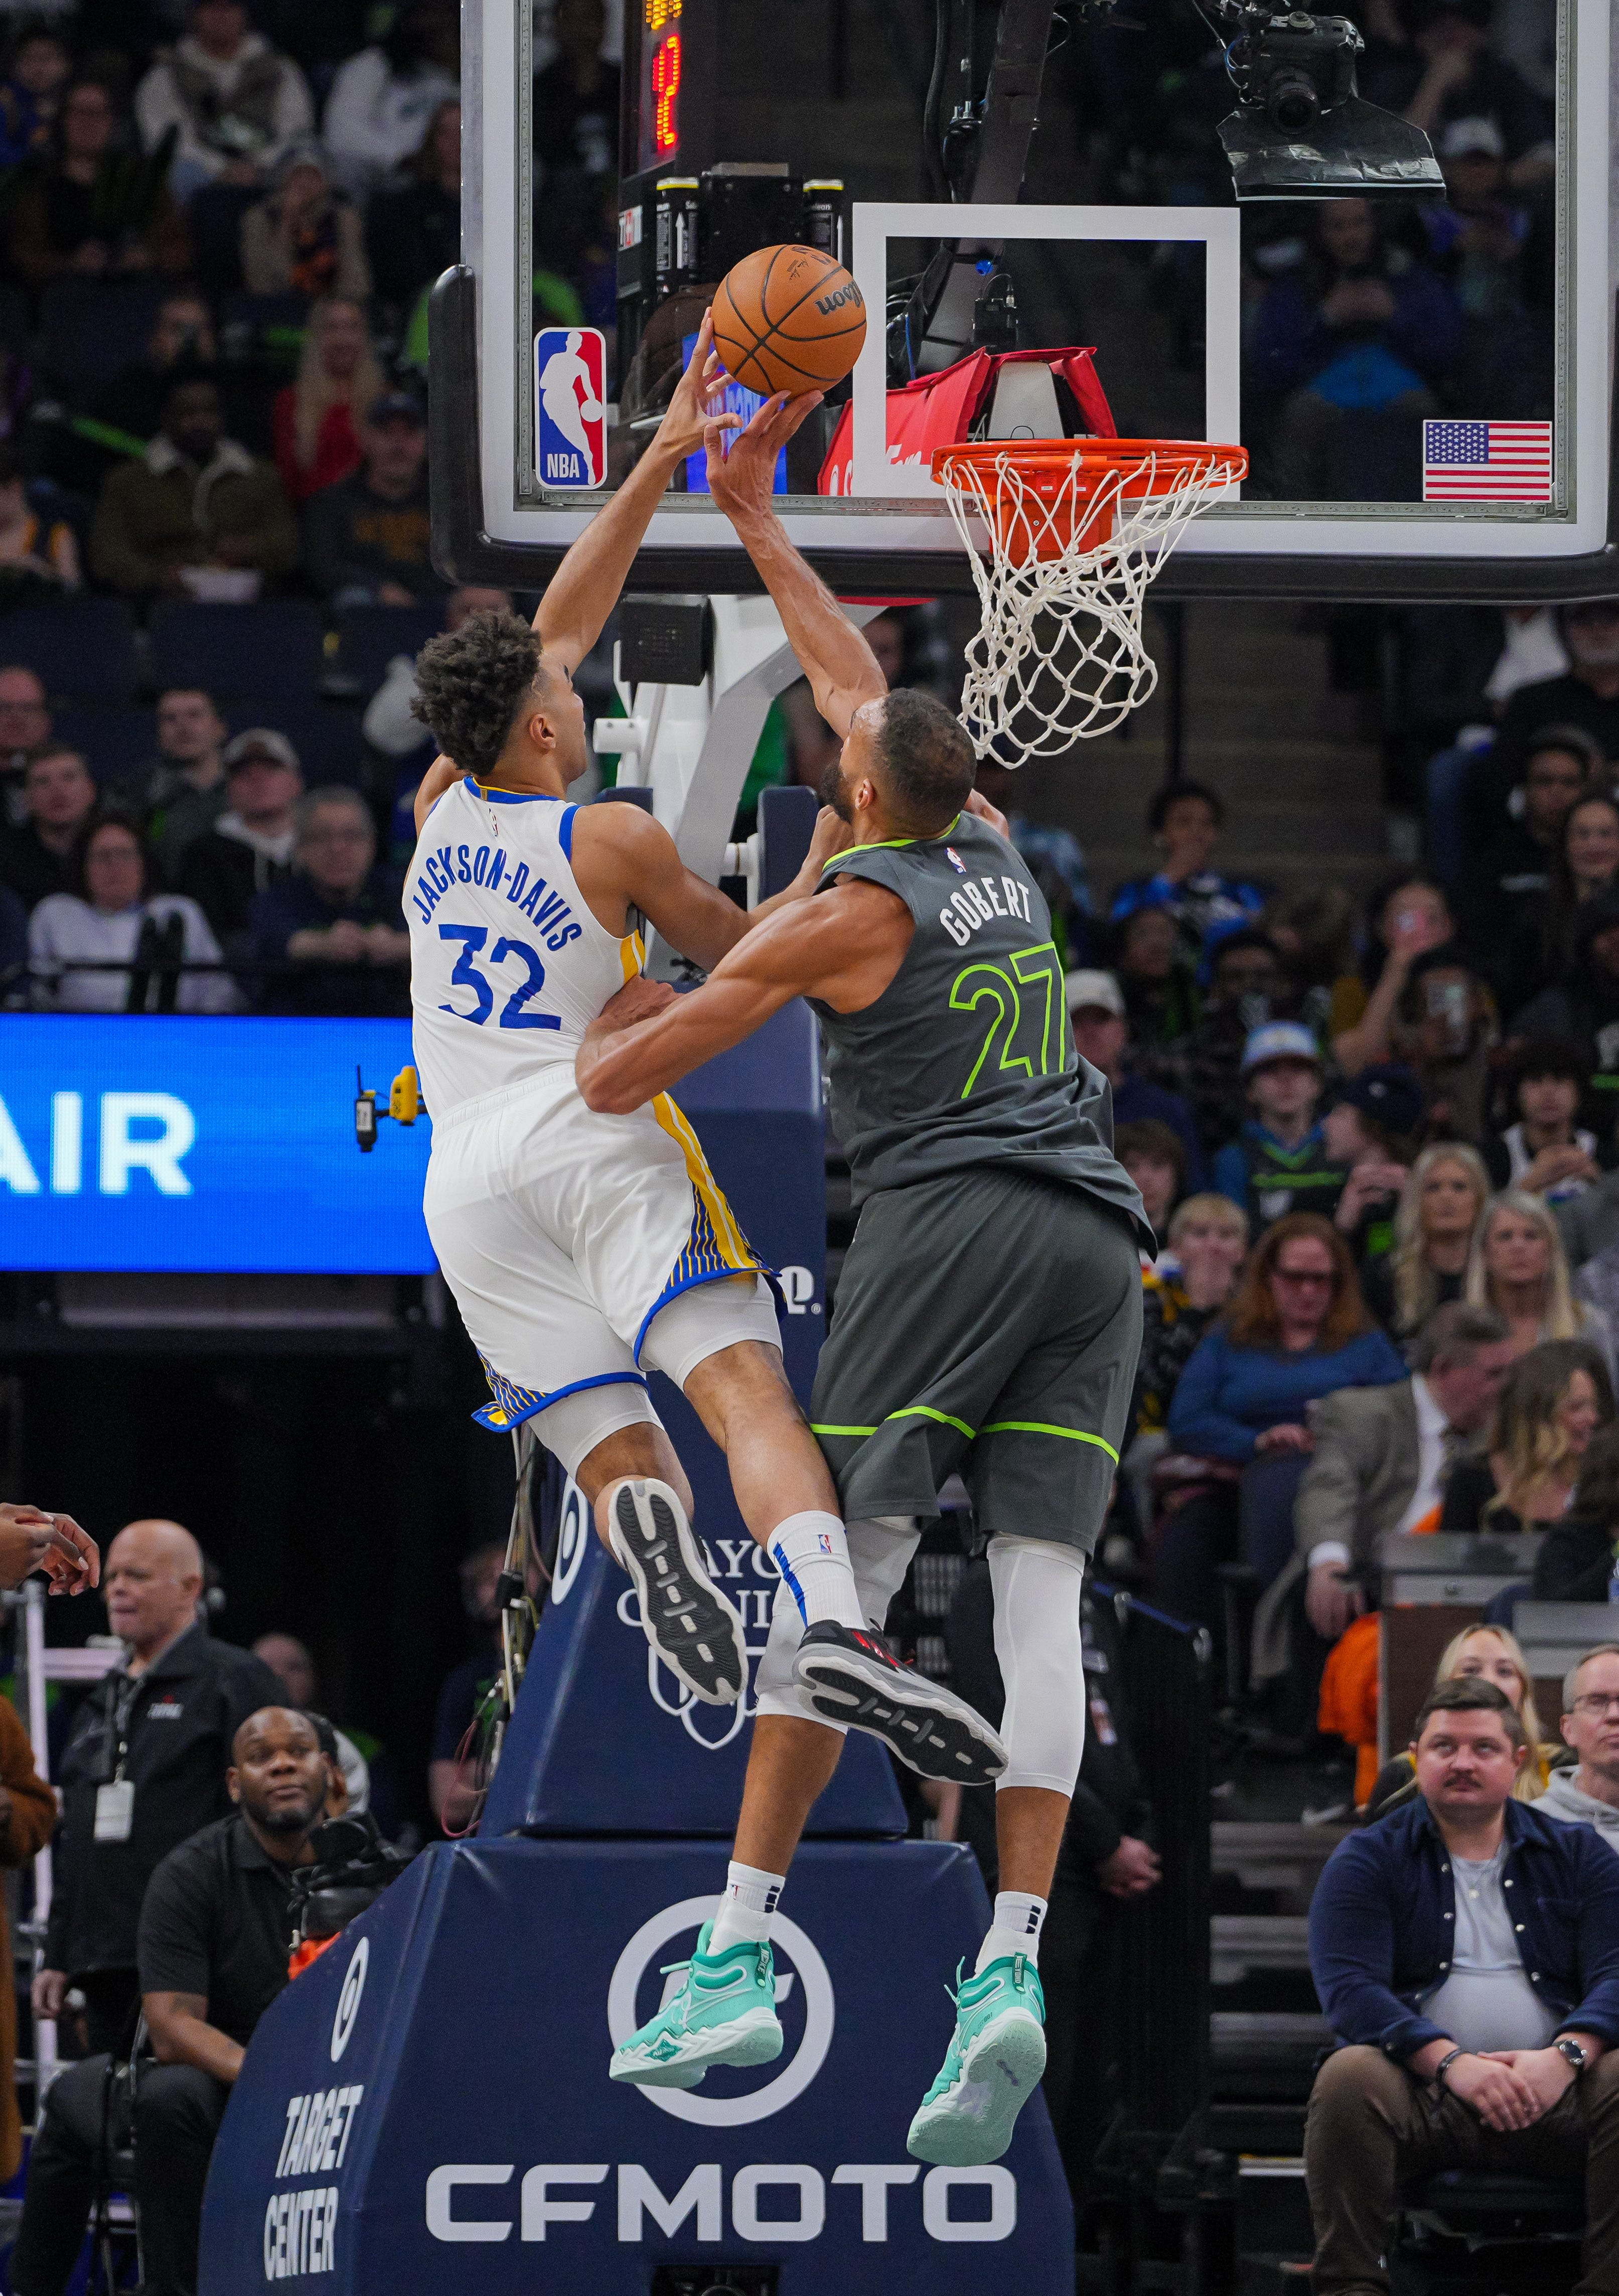 Timberwolves' Rudy Gobert wins fourth defensive player of year award, tied for most ever